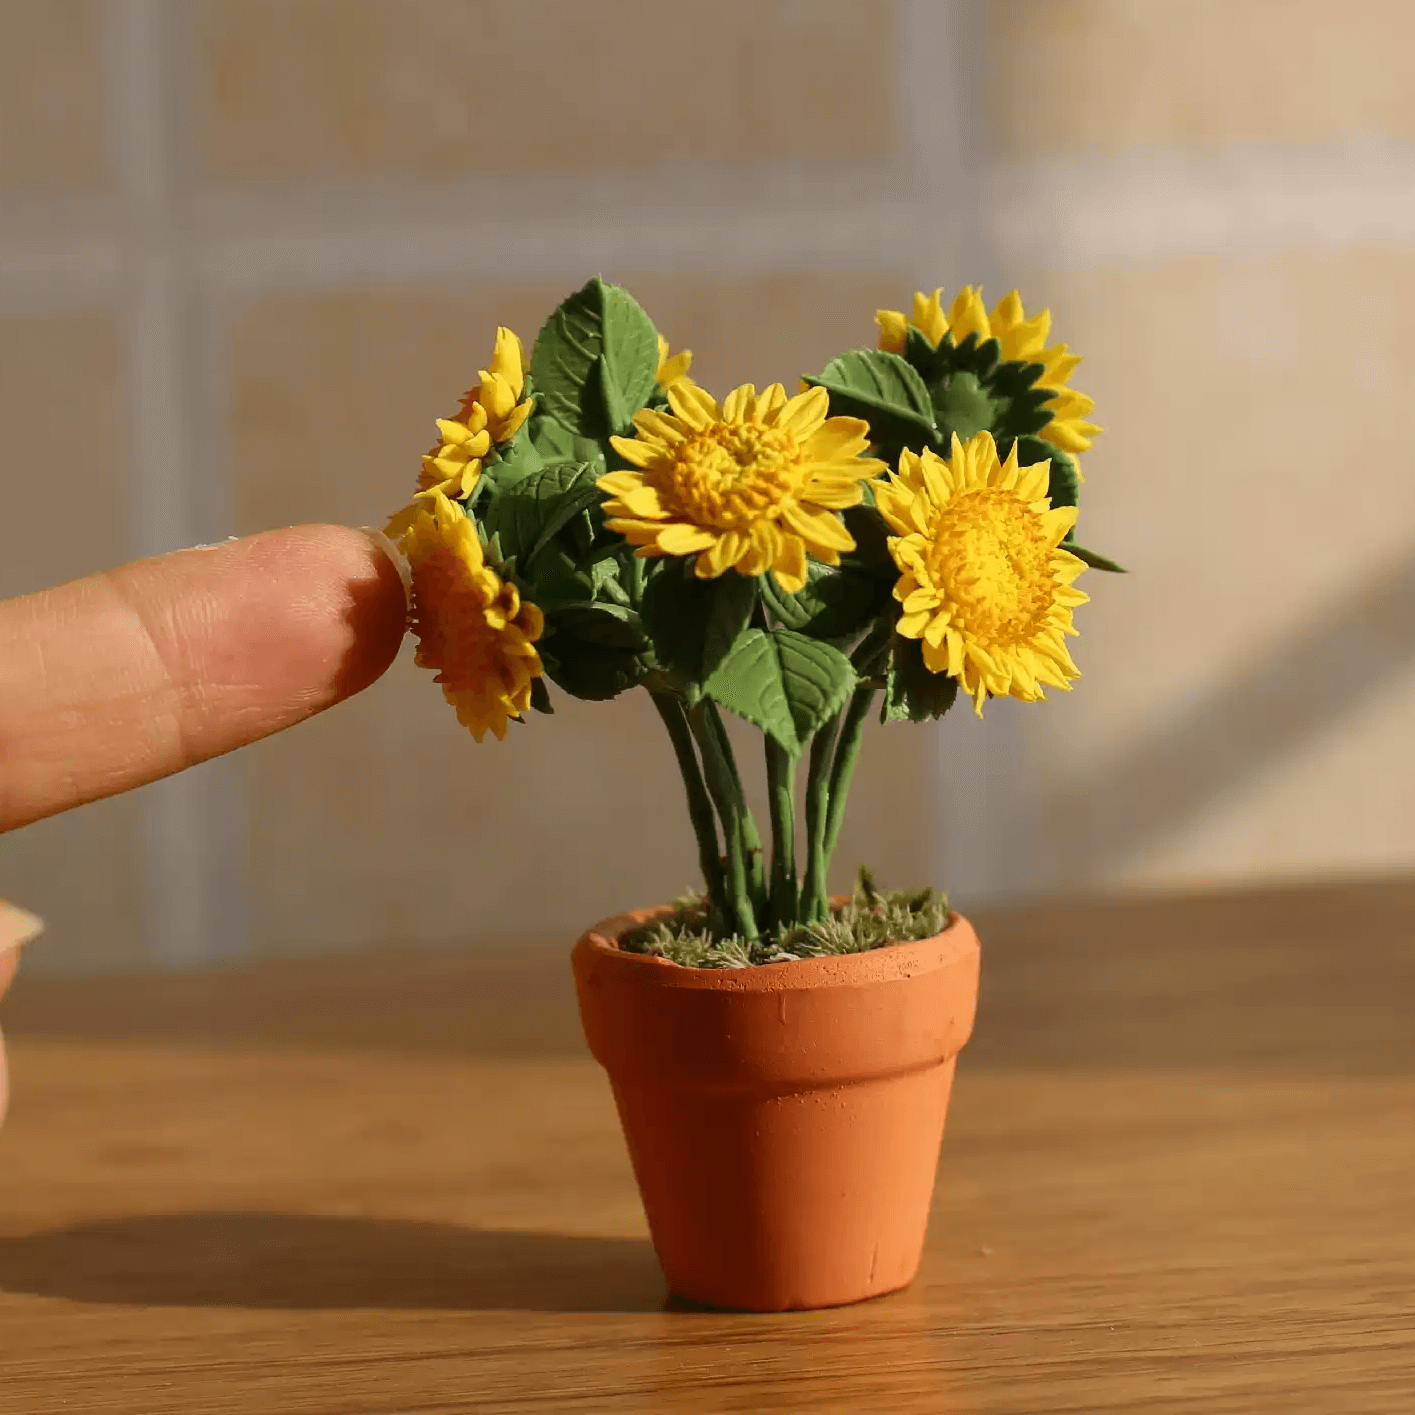 Helianthus annuus is a dwarf growing annual sunflower with large, double golden-yellow flowers, it's an excellent cut flower.  Material: Handmade from Clay